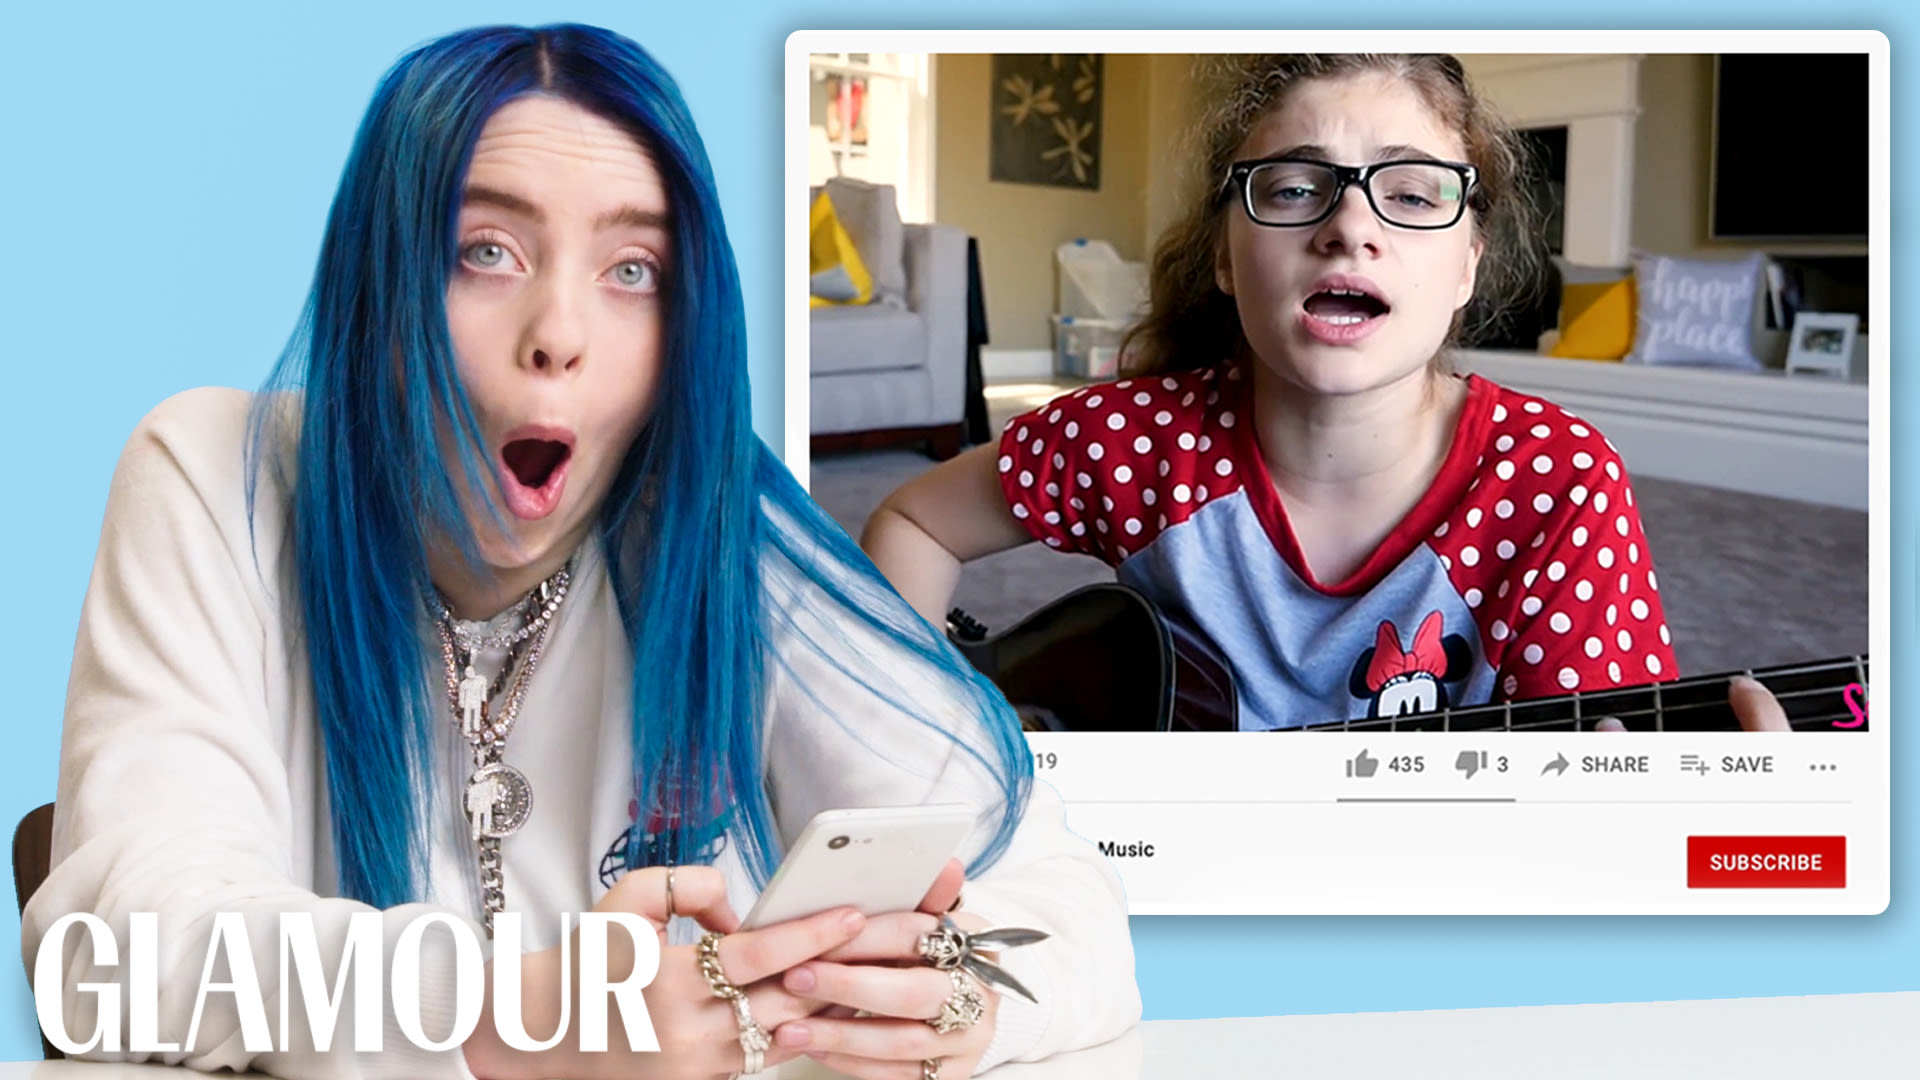 Katy Perry Hardcore Anal - Watch Billie Eilish Watches Fan Covers on YouTube | You Sang My Song |  Glamour